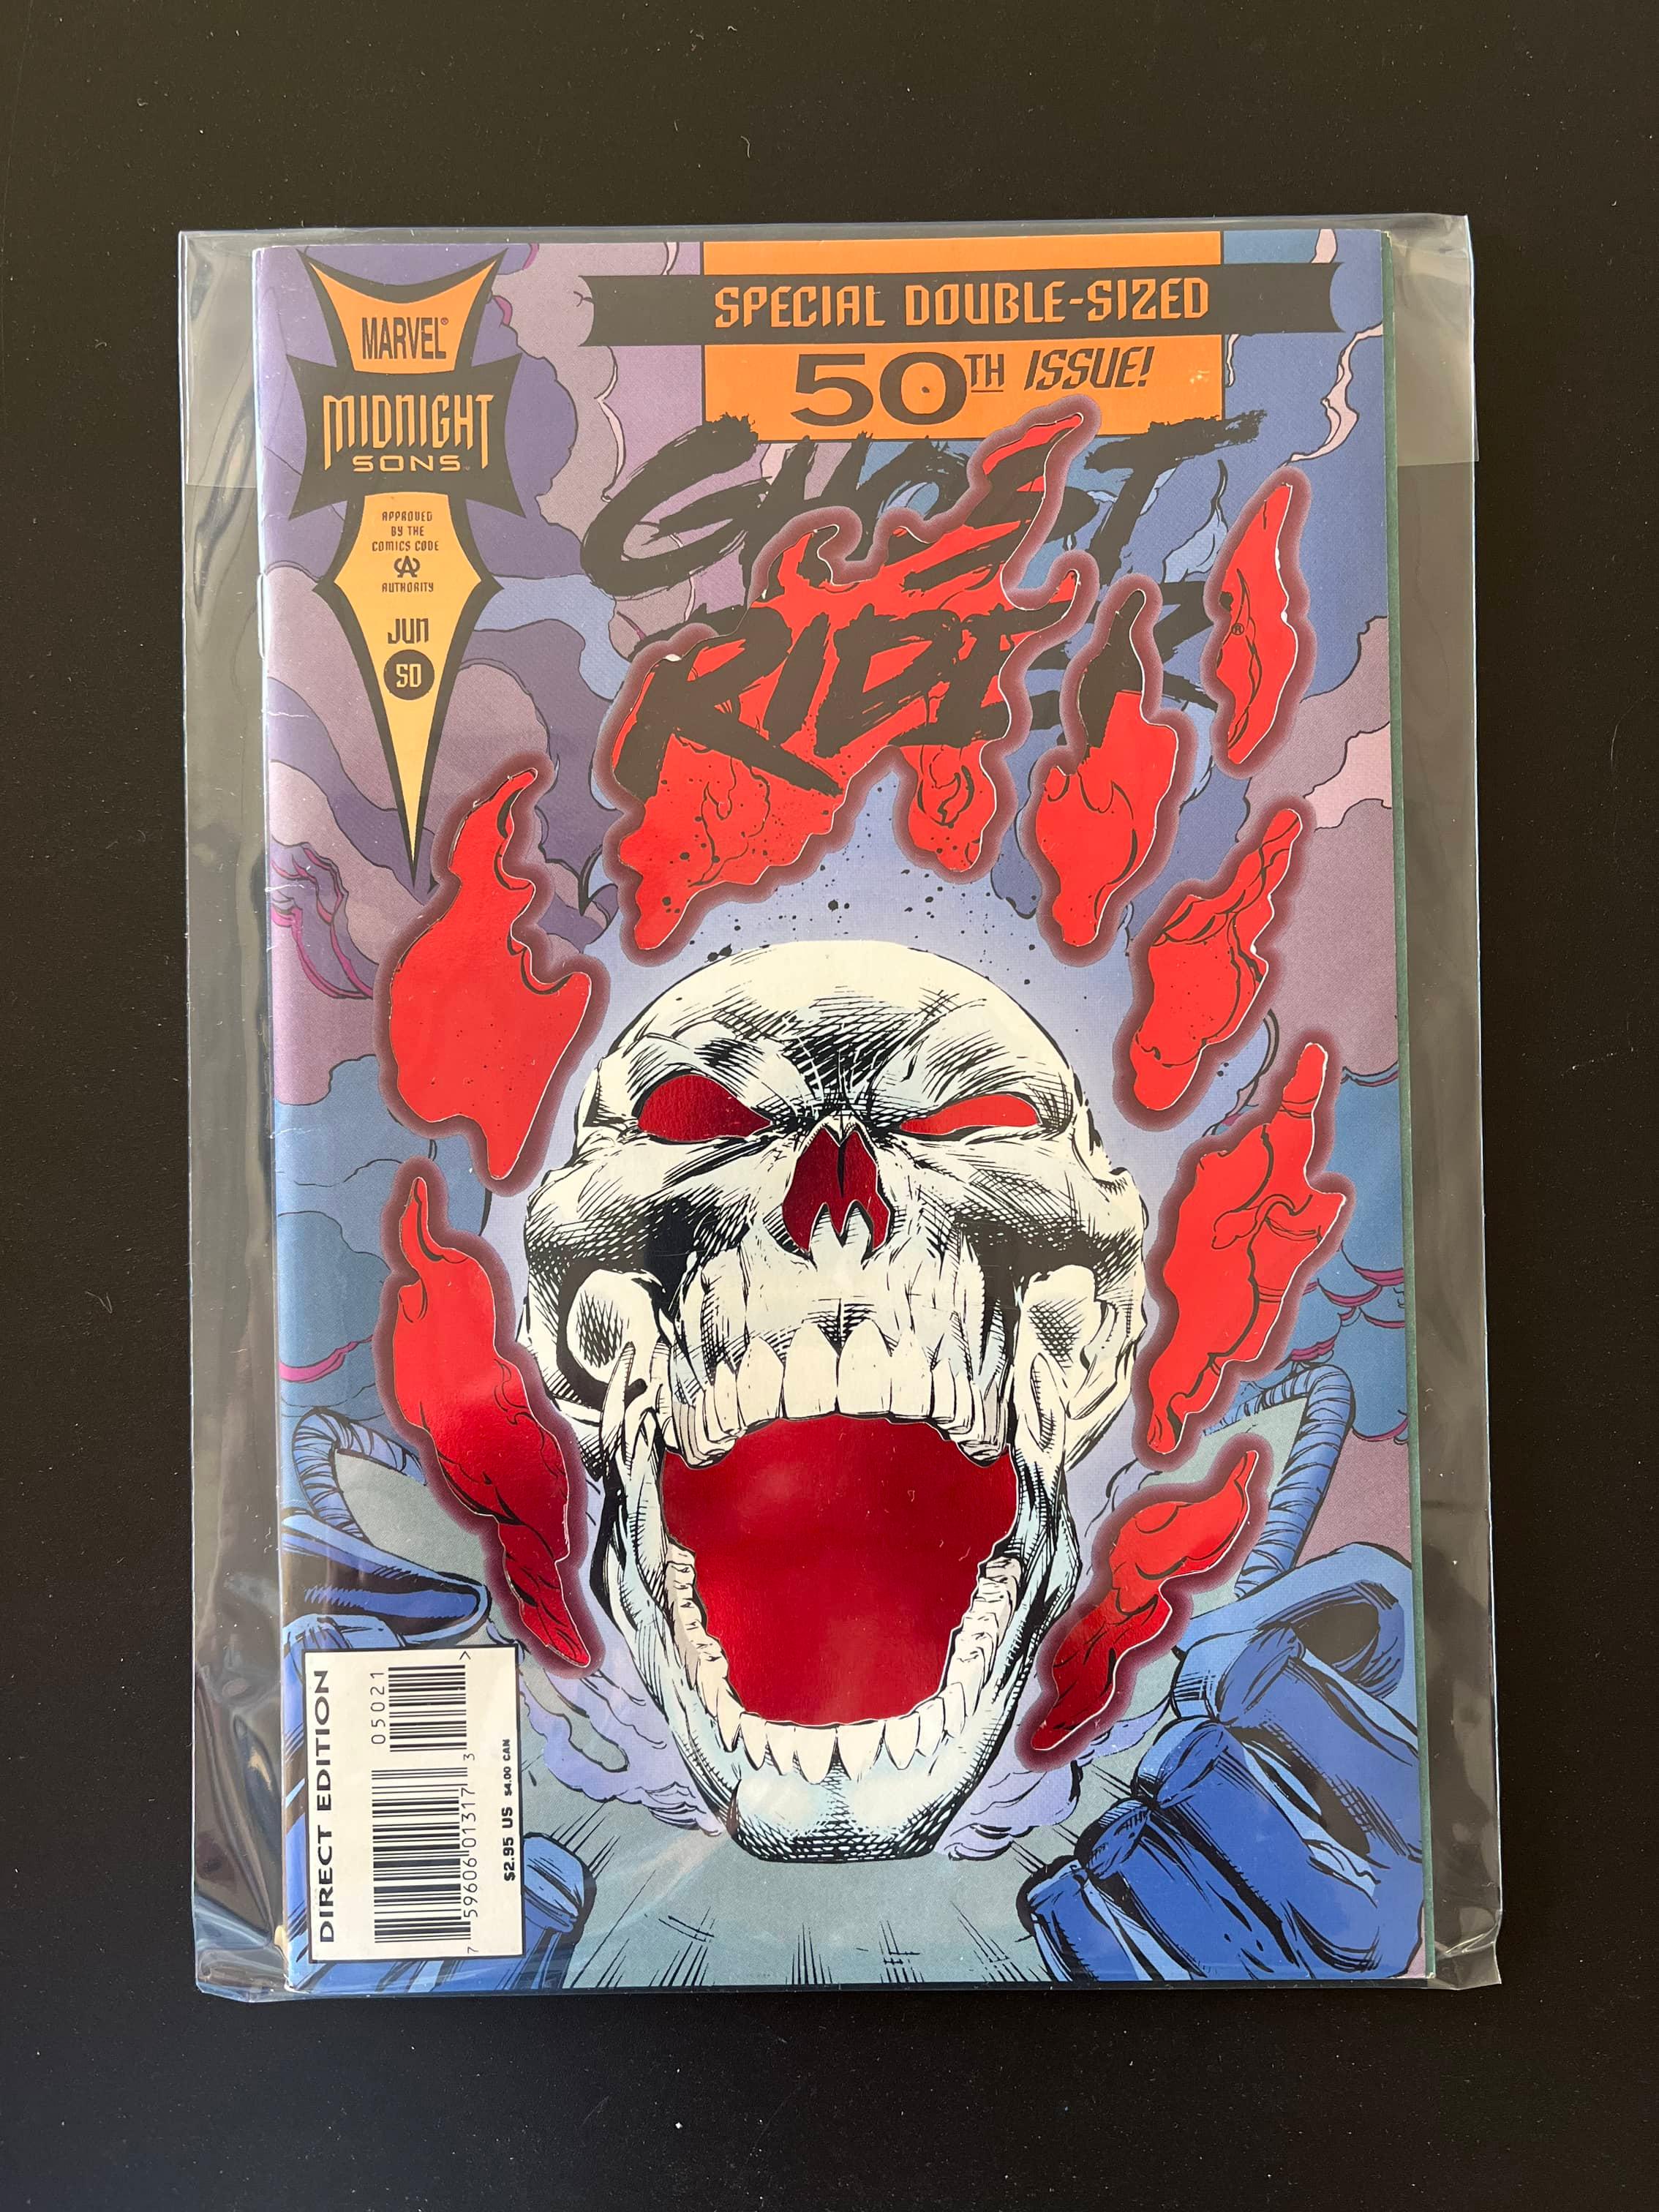 Ghost Rider Comic #50 Marvel Comics KEY Special Double Sized 50th Issue